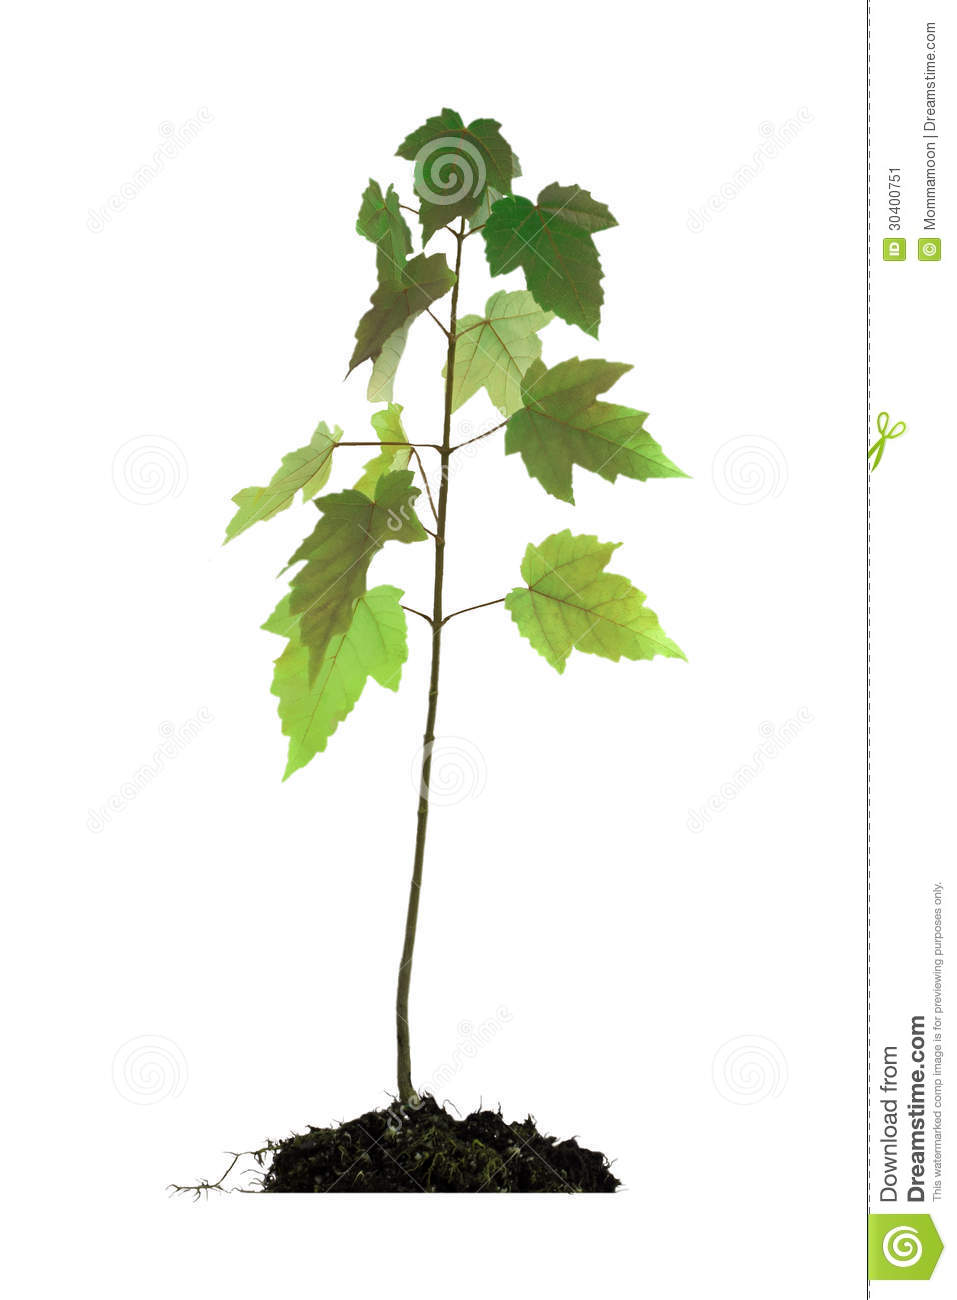 Baby Maple Tree In Root Ball Stock Image   Image  30400751